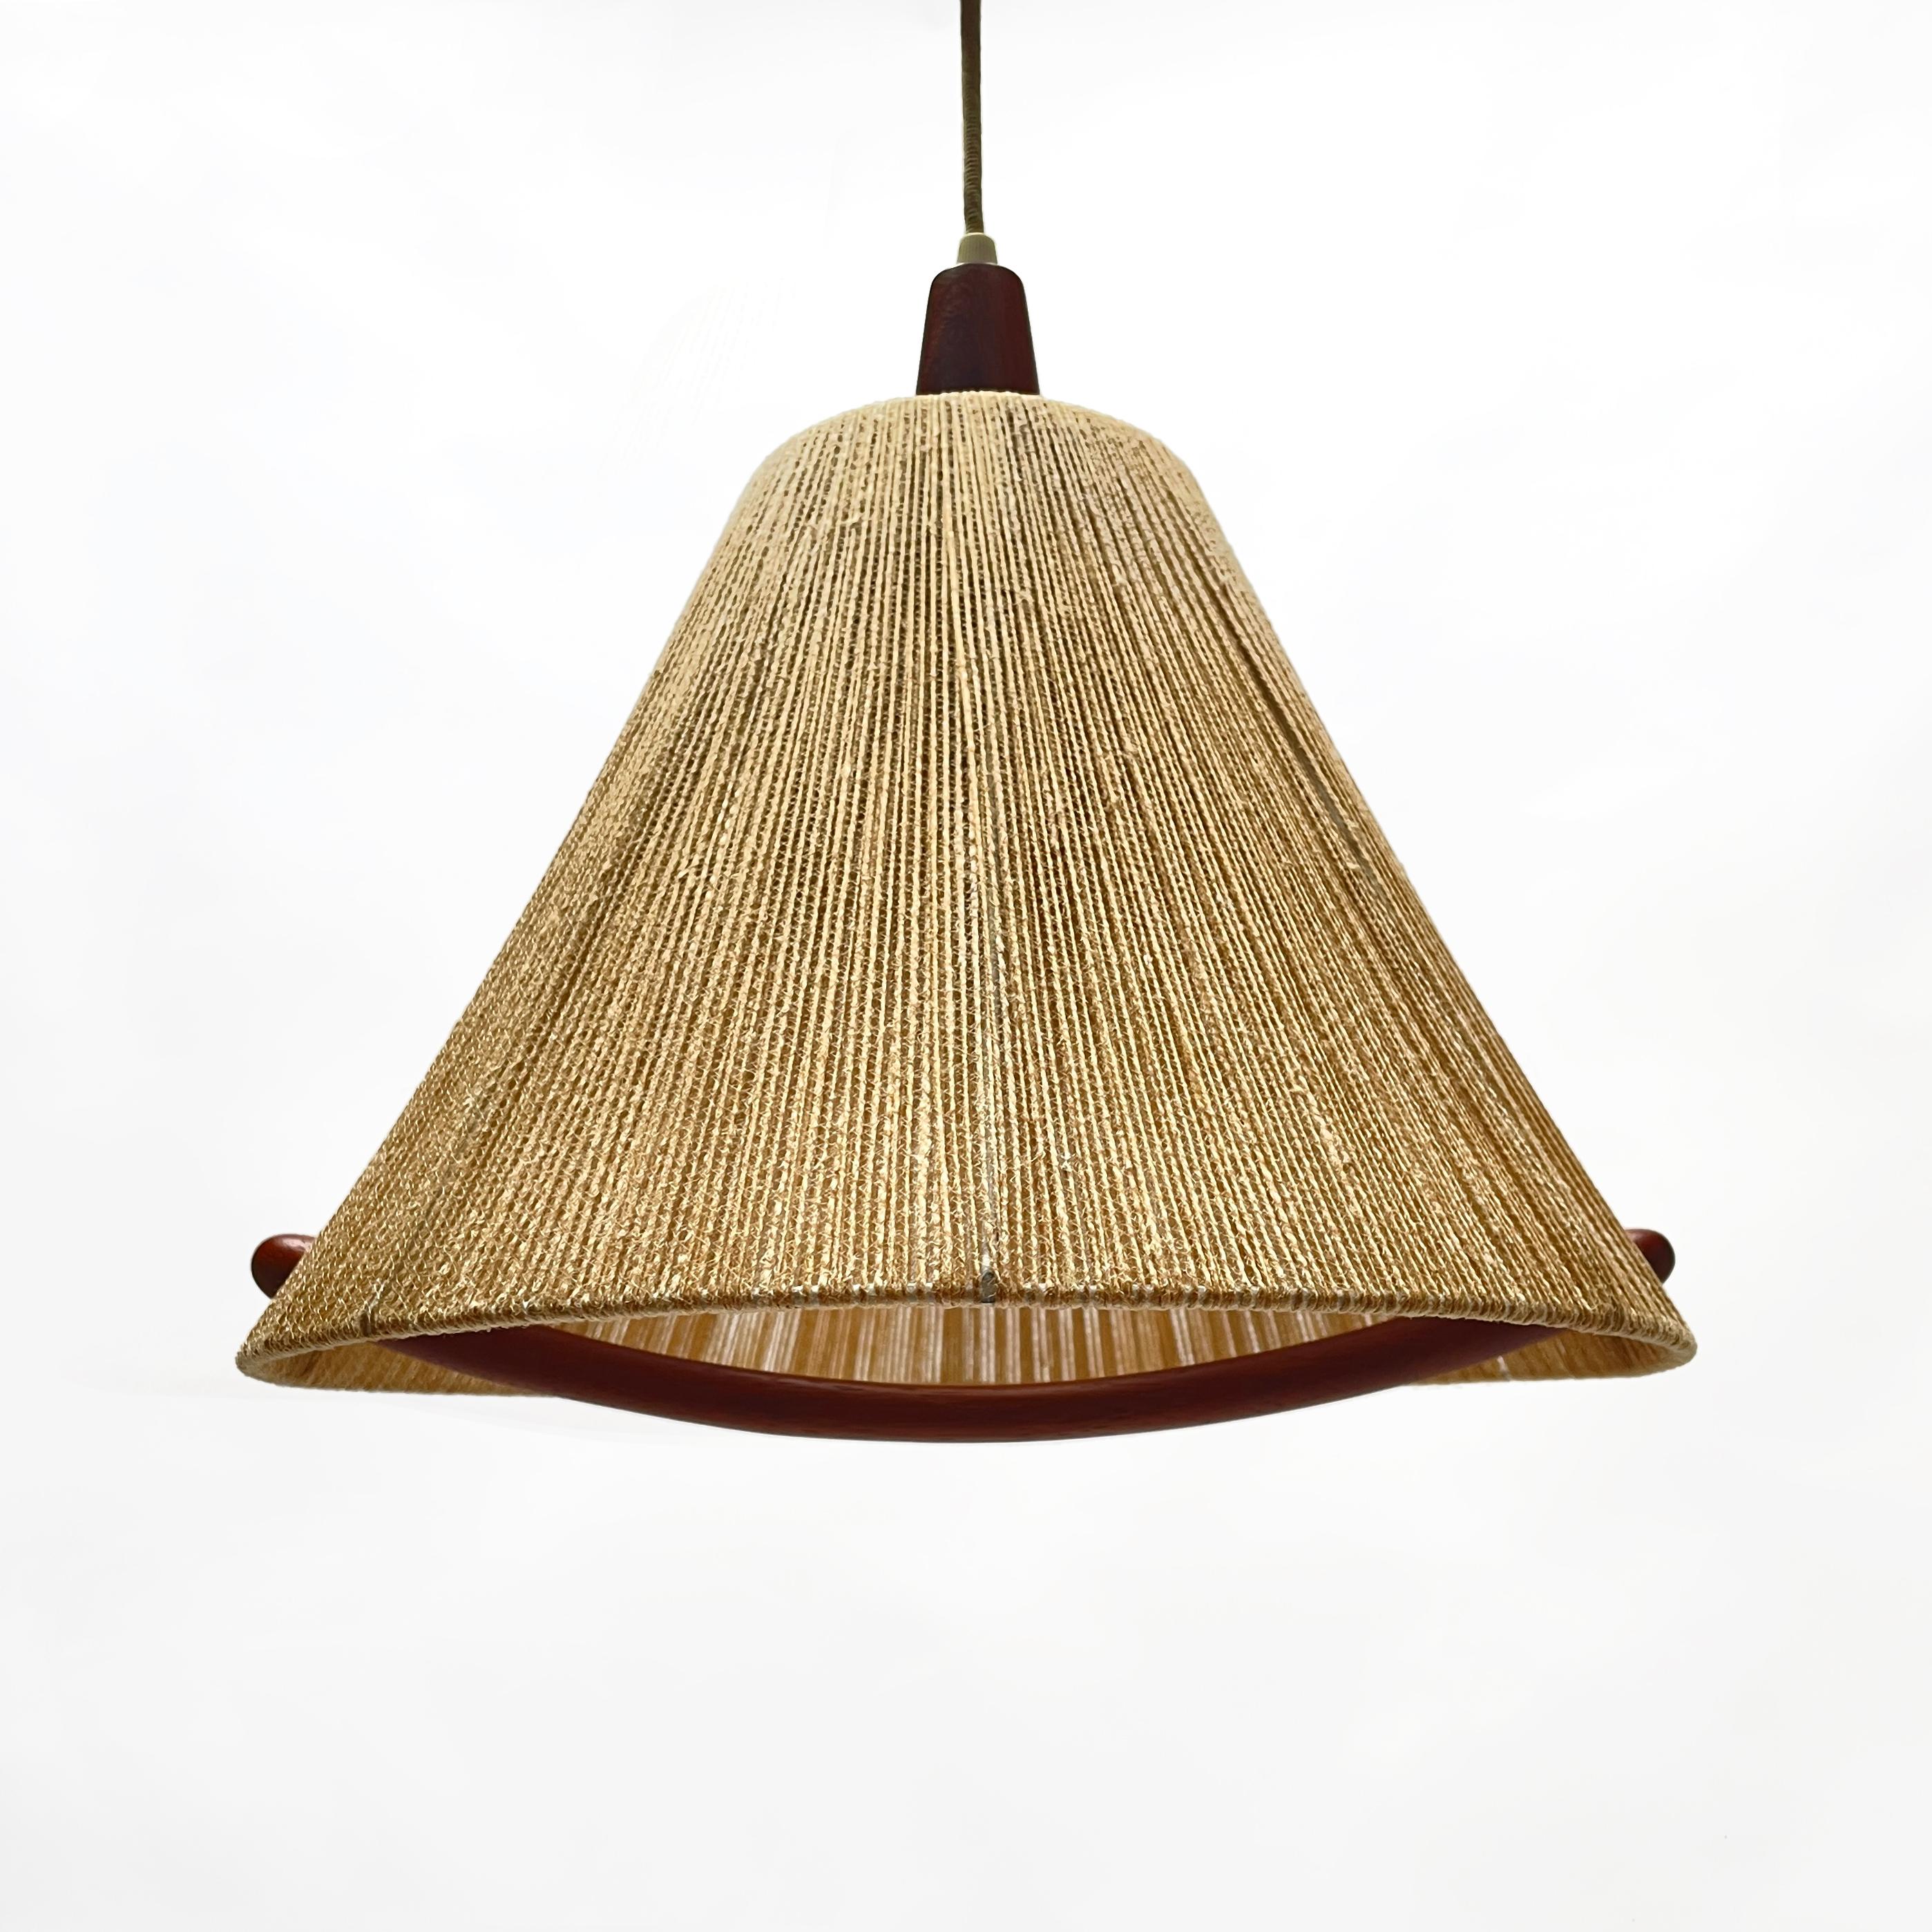 Charming Temde teak and raffia hanging lamp from the 1960s. 
The lampshade itself is made of raffia and has beautiful teak details. With the help of the teak handle, the lamp can be easily adjusted in height. The pull mechanism in the teak canopy